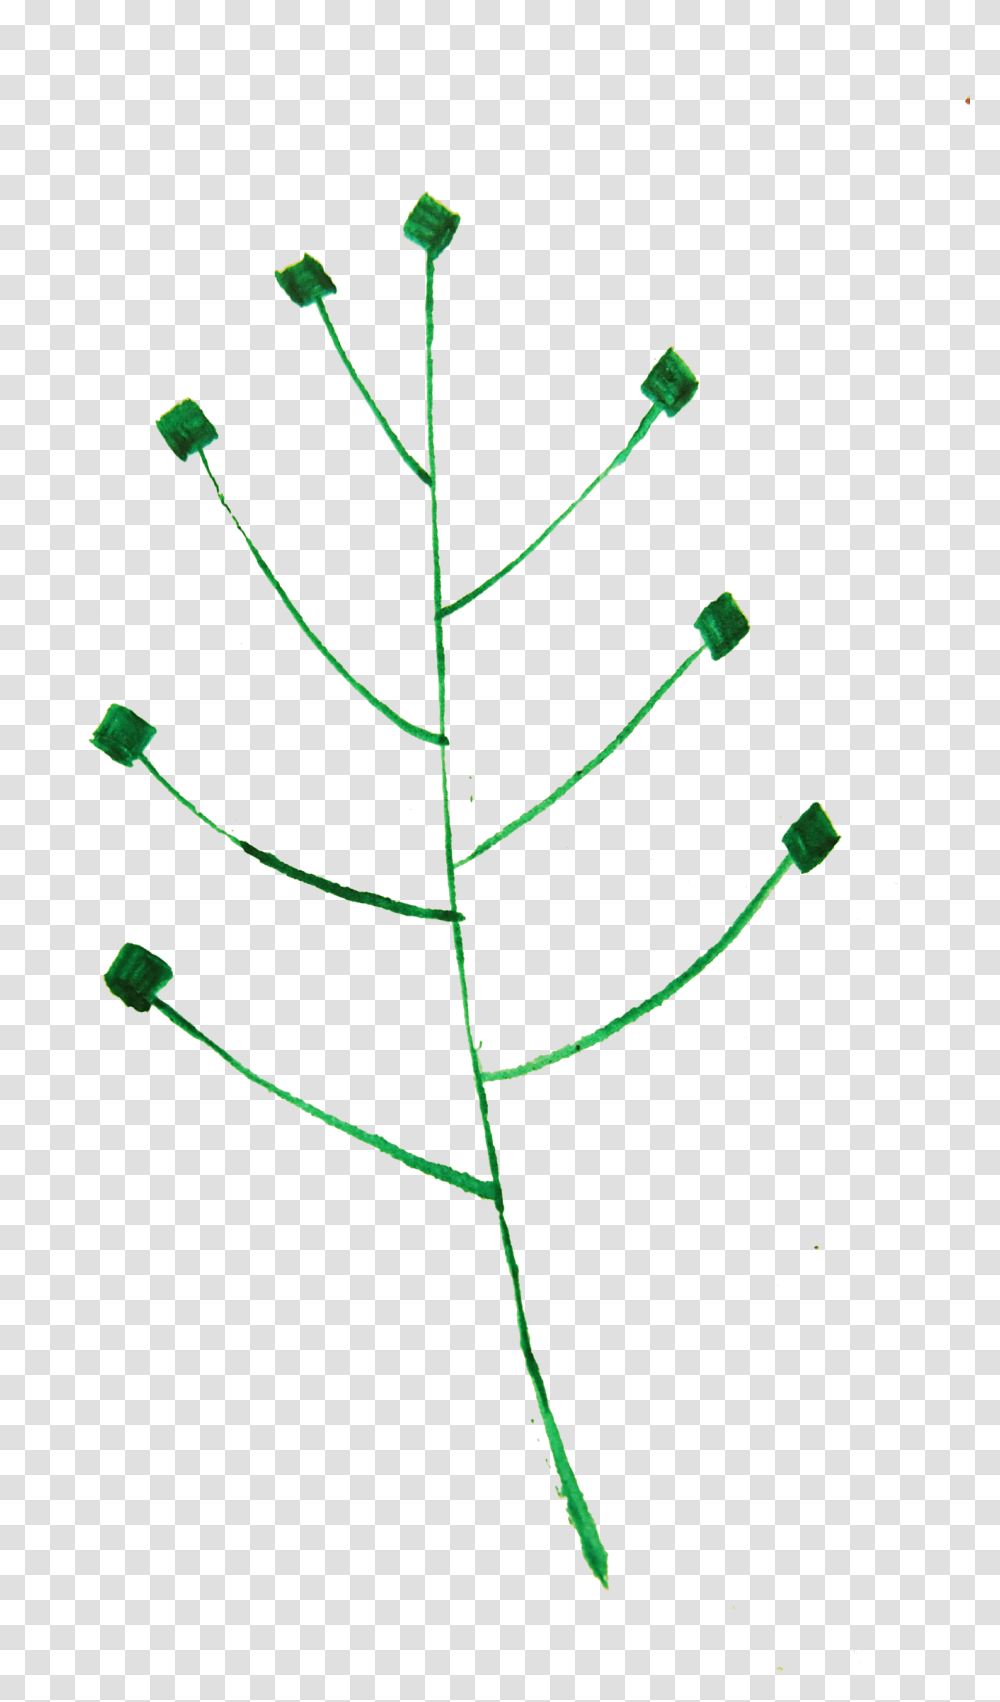 Calligraphic Illustration Leaf Twig Plant 1 Clip Christmas Tree, Insect, Invertebrate, Animal, Flower Transparent Png